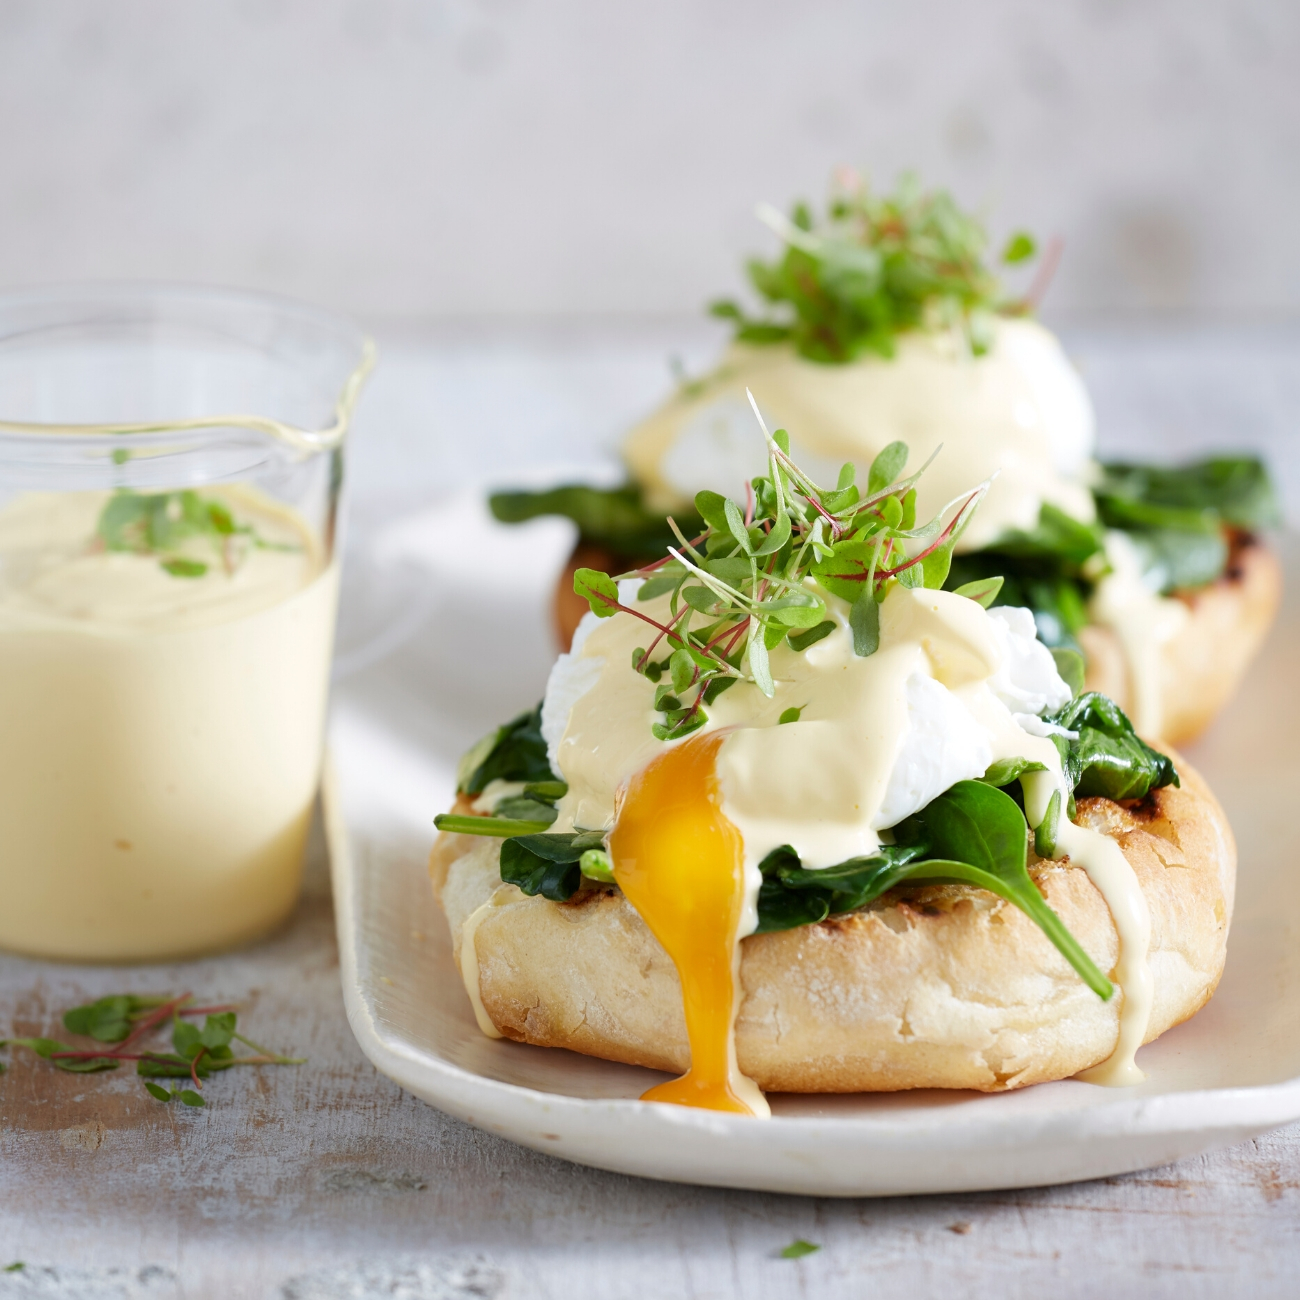 Dress up your eggs with our homemade Hollandaise sauce